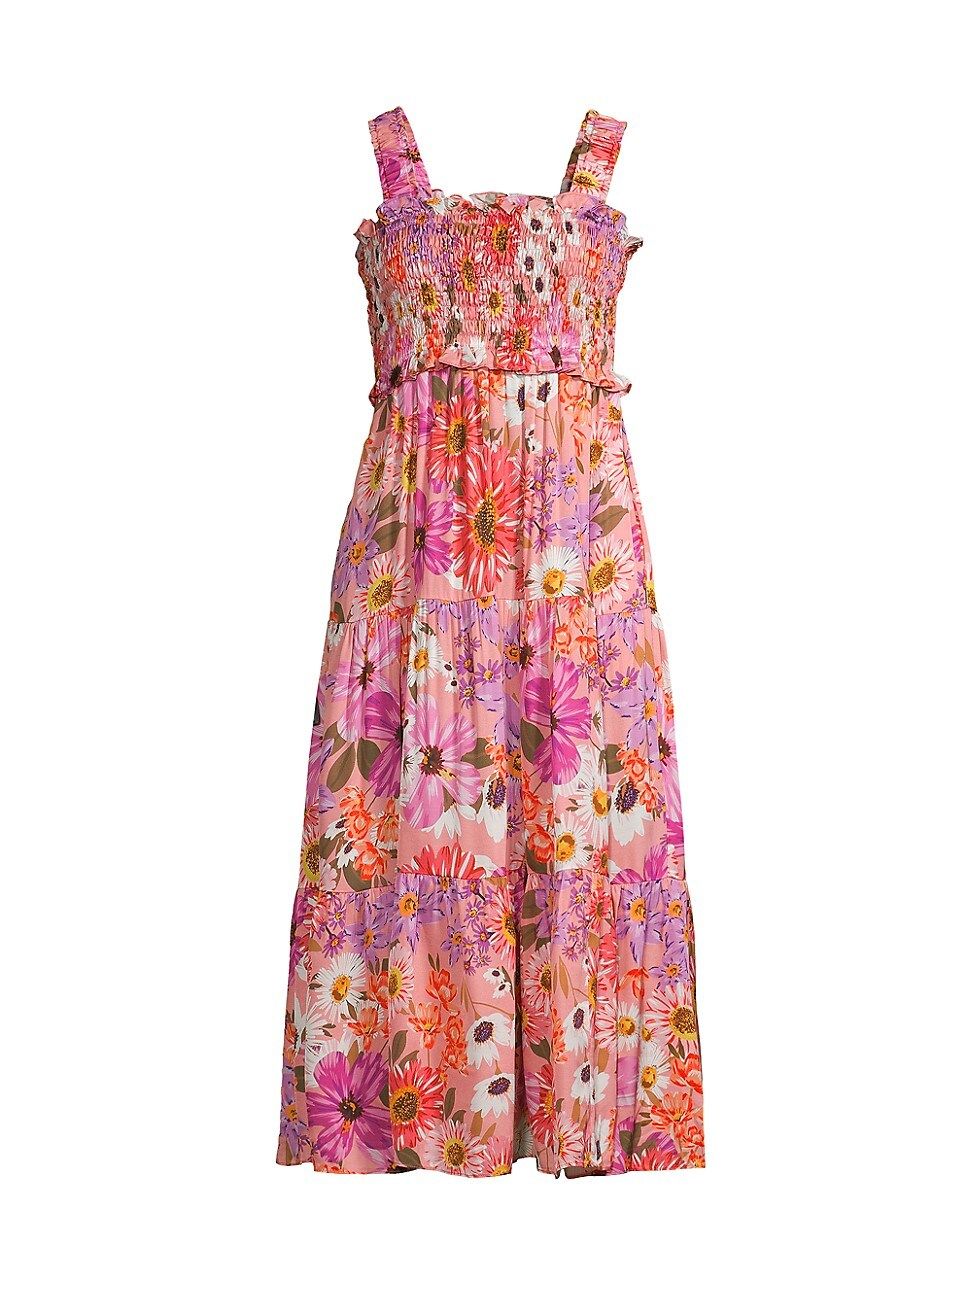 Women's Tiered Floral Smocked Midi-Dress - Botanical Floral - Size 6 - Botanical Floral - Size 6 | Saks Fifth Avenue